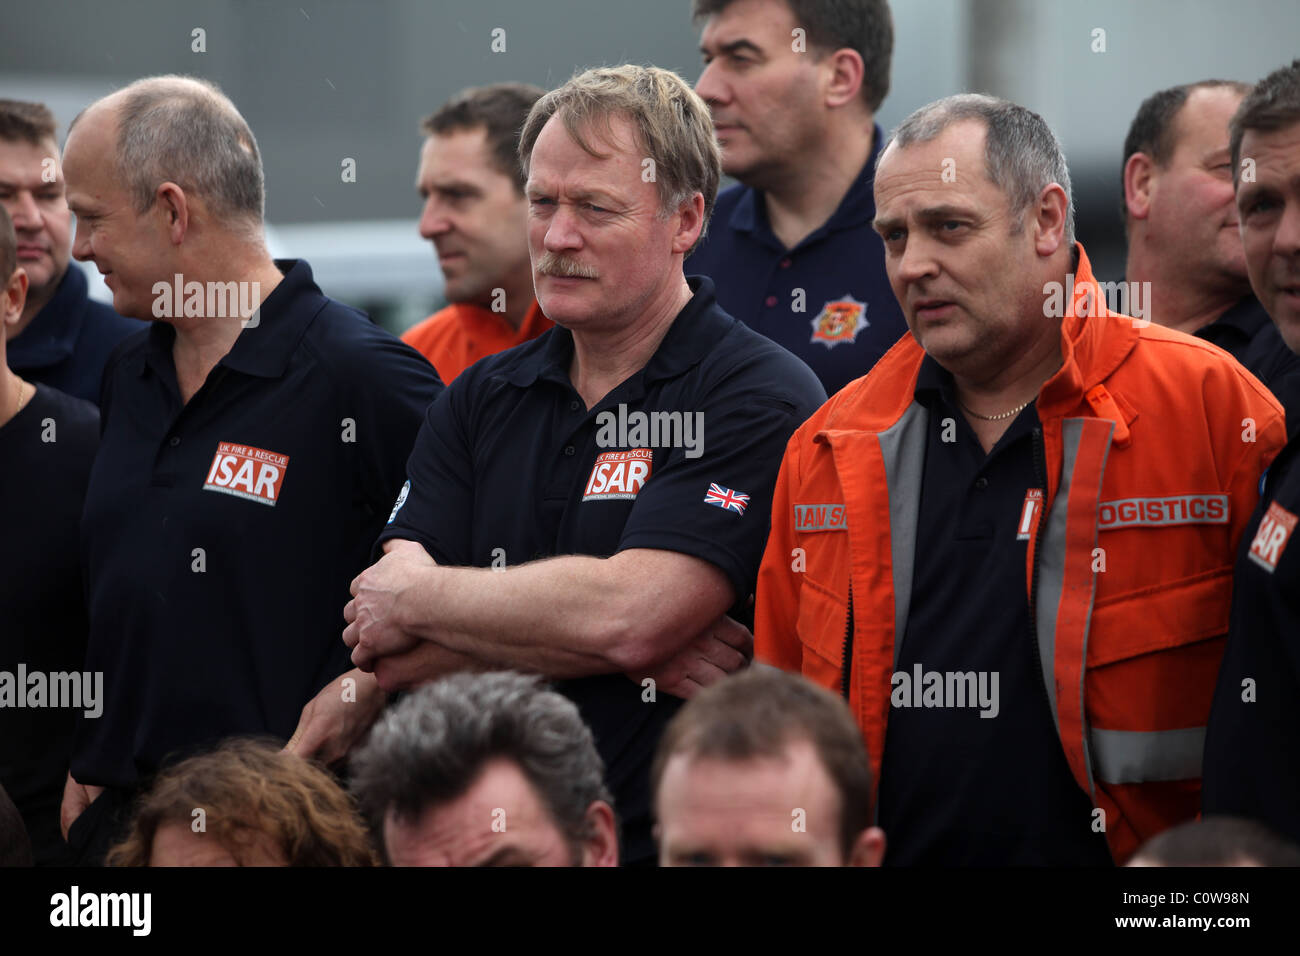 Members of the British urban search and rescue team arrive at Christchurch airport after the 6.3 magnitude earthquake. Stock Photo